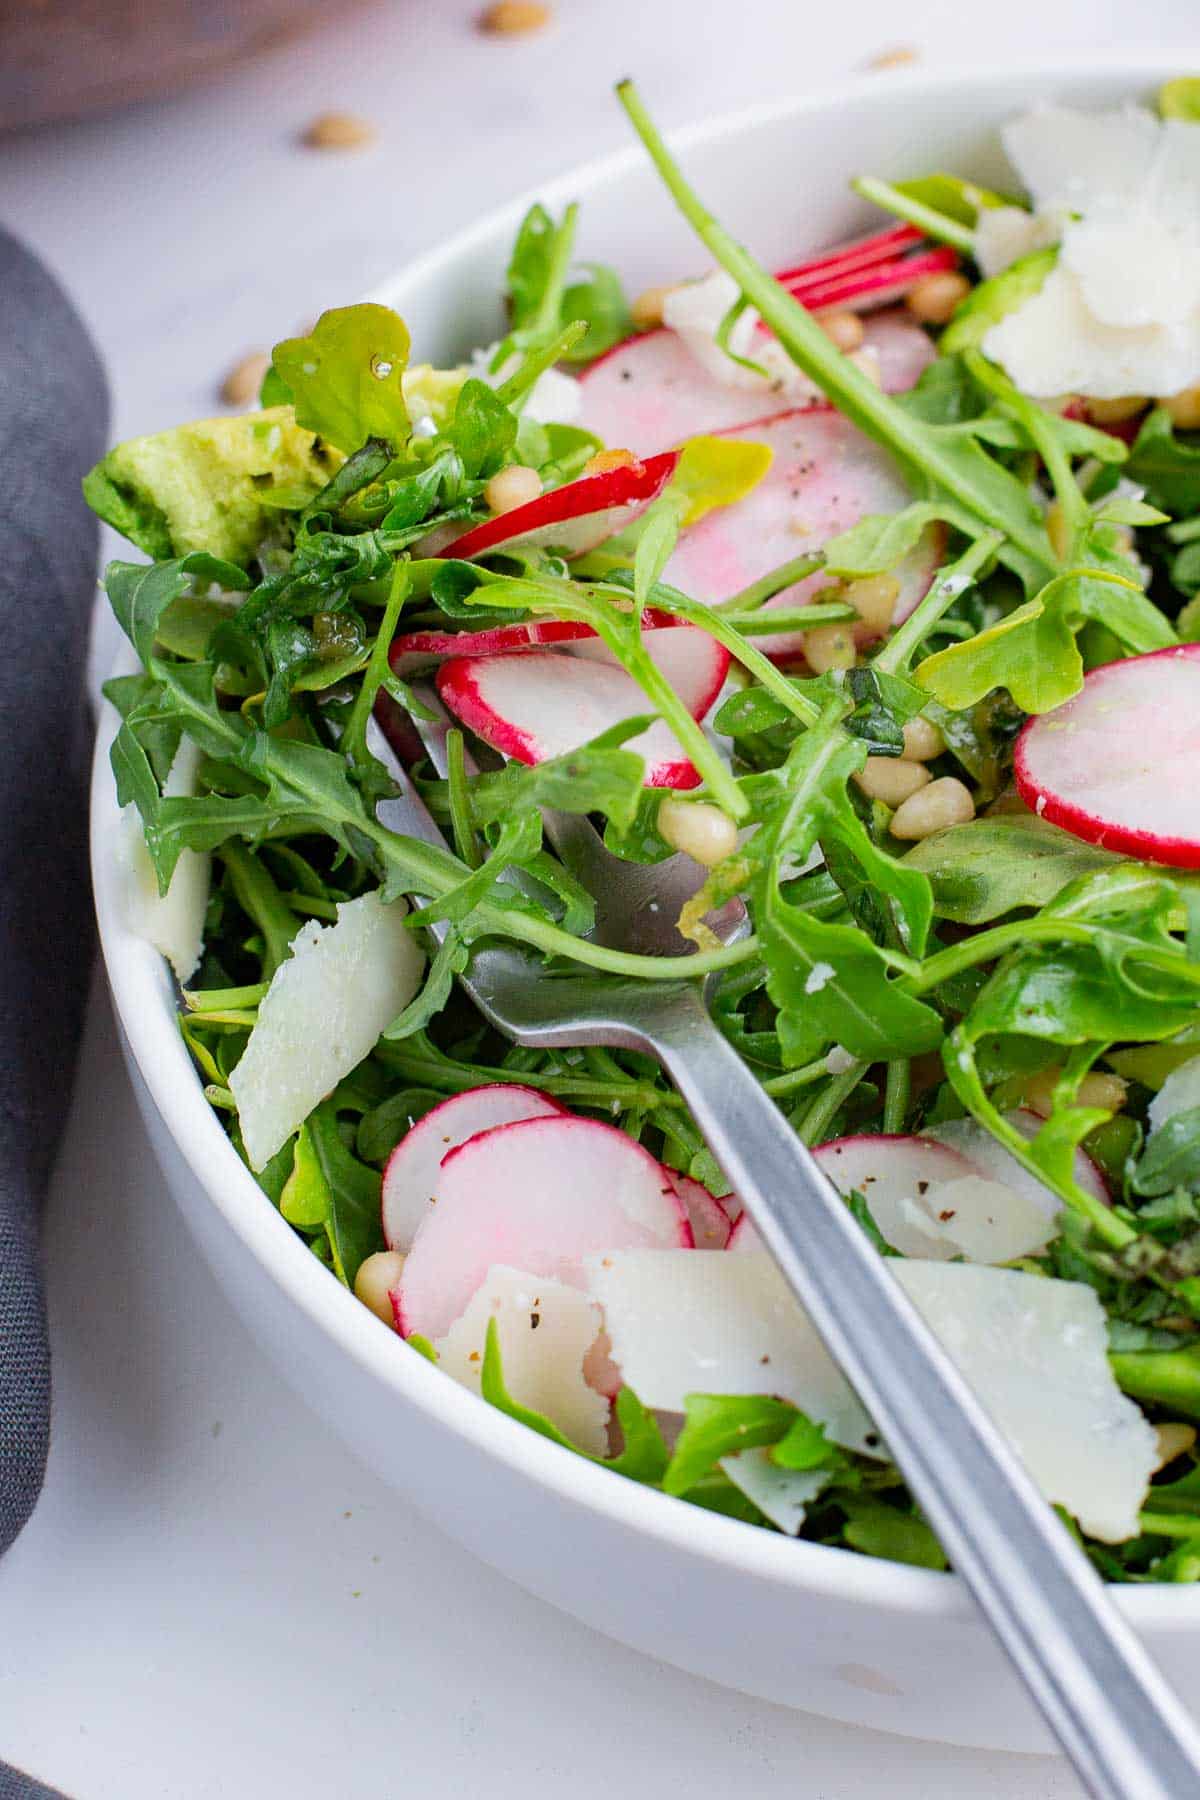 Lemon arugula salad is a fresh and healthy side that is perfect all summer long.